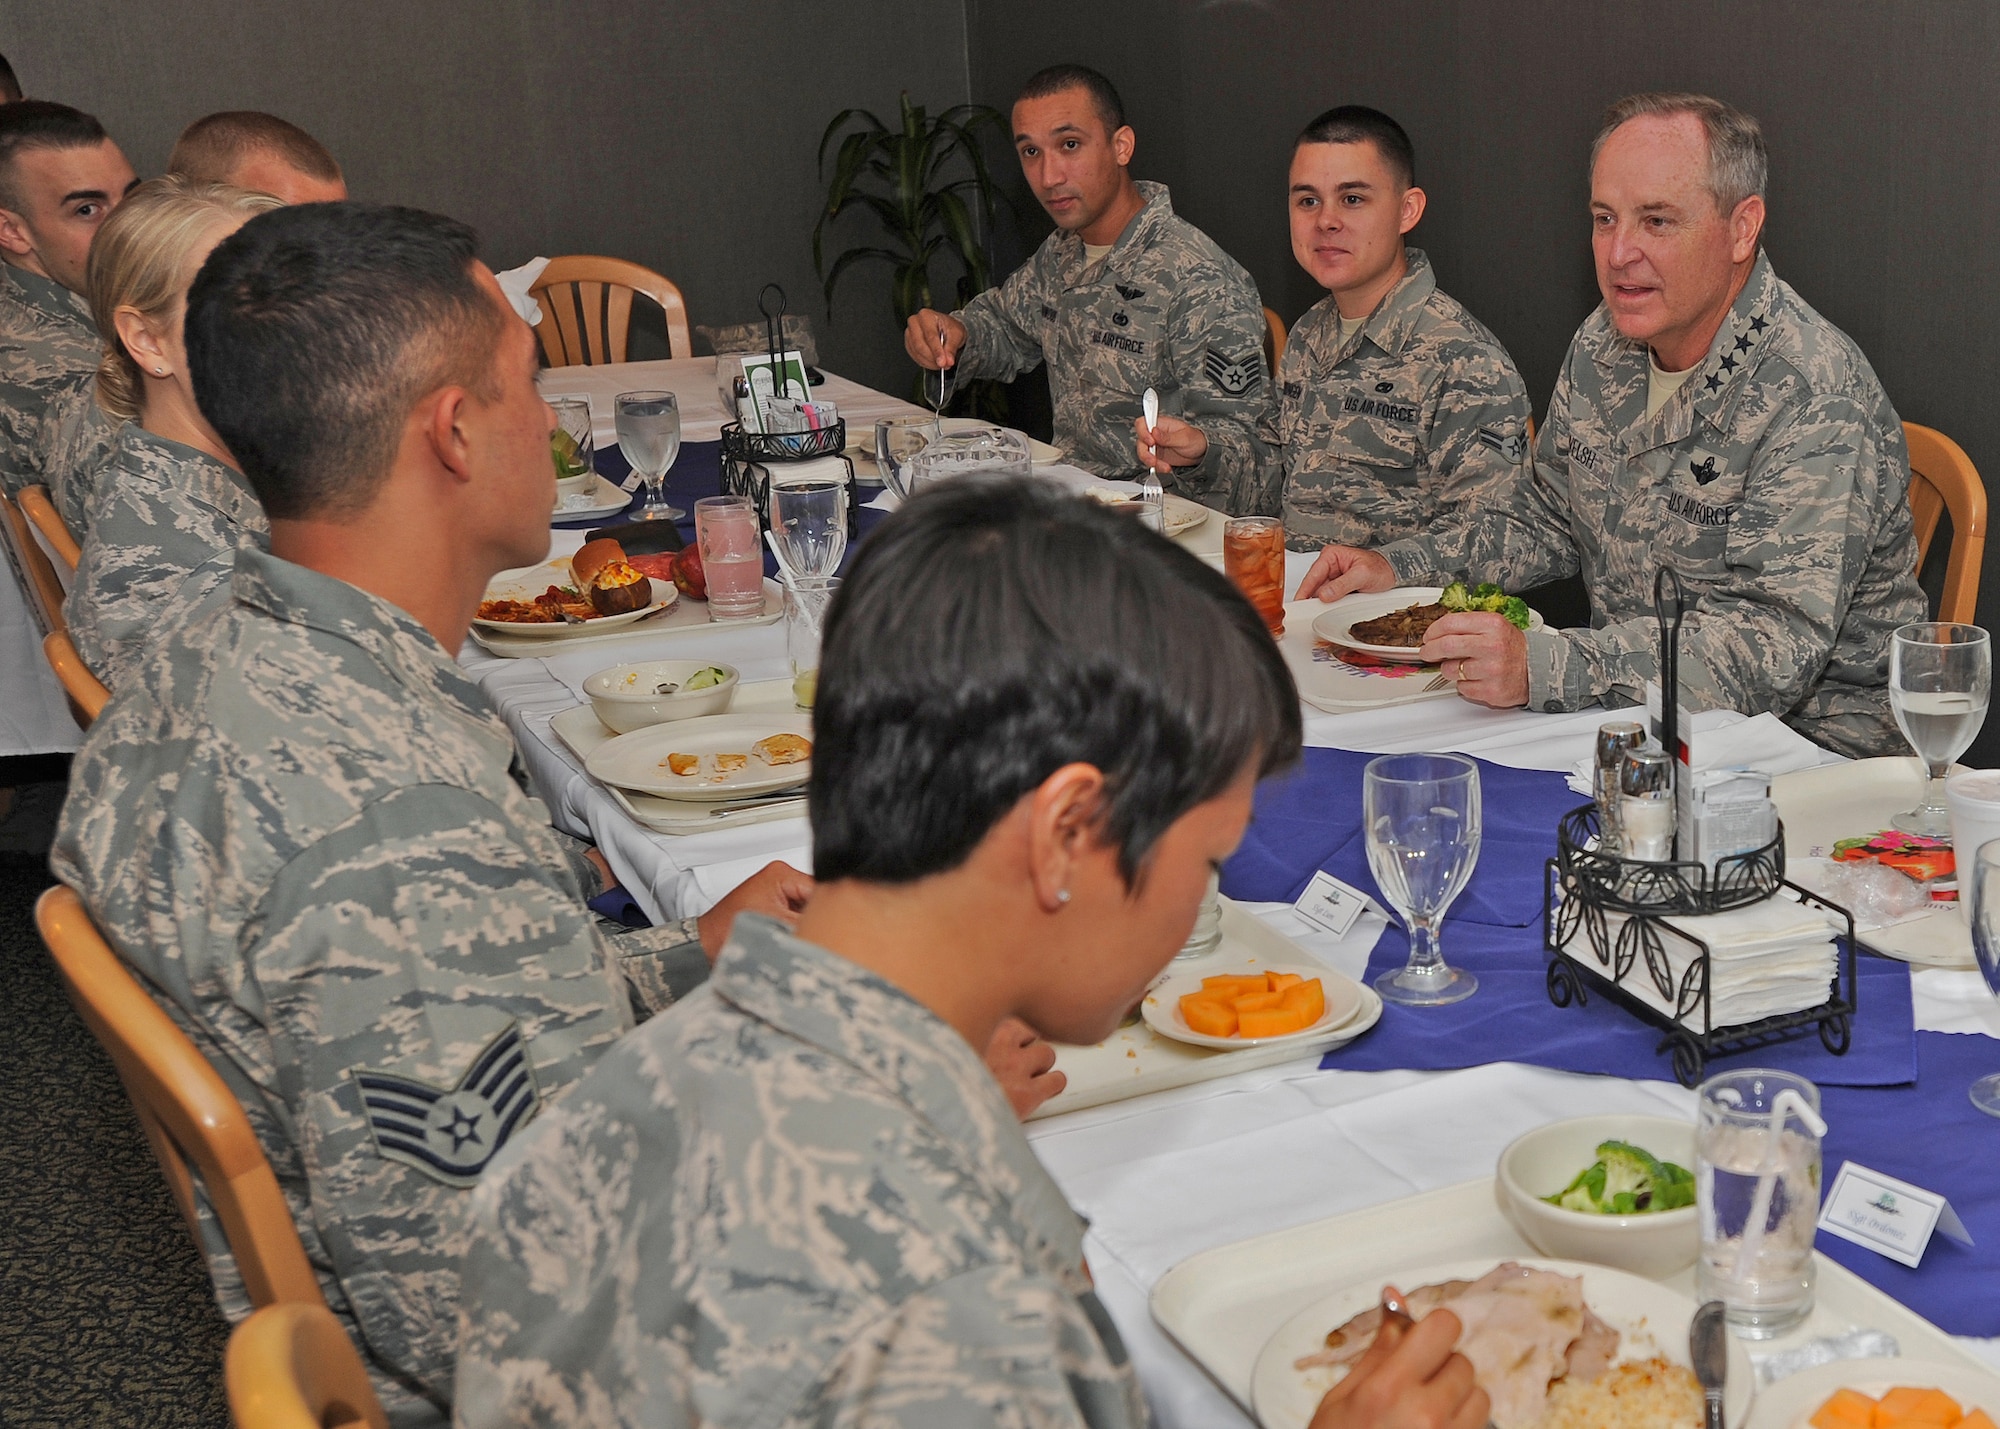 Air Force Chief of Staff Gen. Mark A. Welsh III shares lunch with Pacific Air Forces Airmen at the Hale Aina Dining Facility at Joint Base Pearl Harbor-Hickam, Hawaii, Aug. 19, 2013. As part of a three-day visit to Hawaii, Welsh thanked Airmen for their continued service and dedication and addressed issues concerning Airmen and their families. (U.S. Air Force photo/Tech. Sgt. Jerome S. Tayborn)